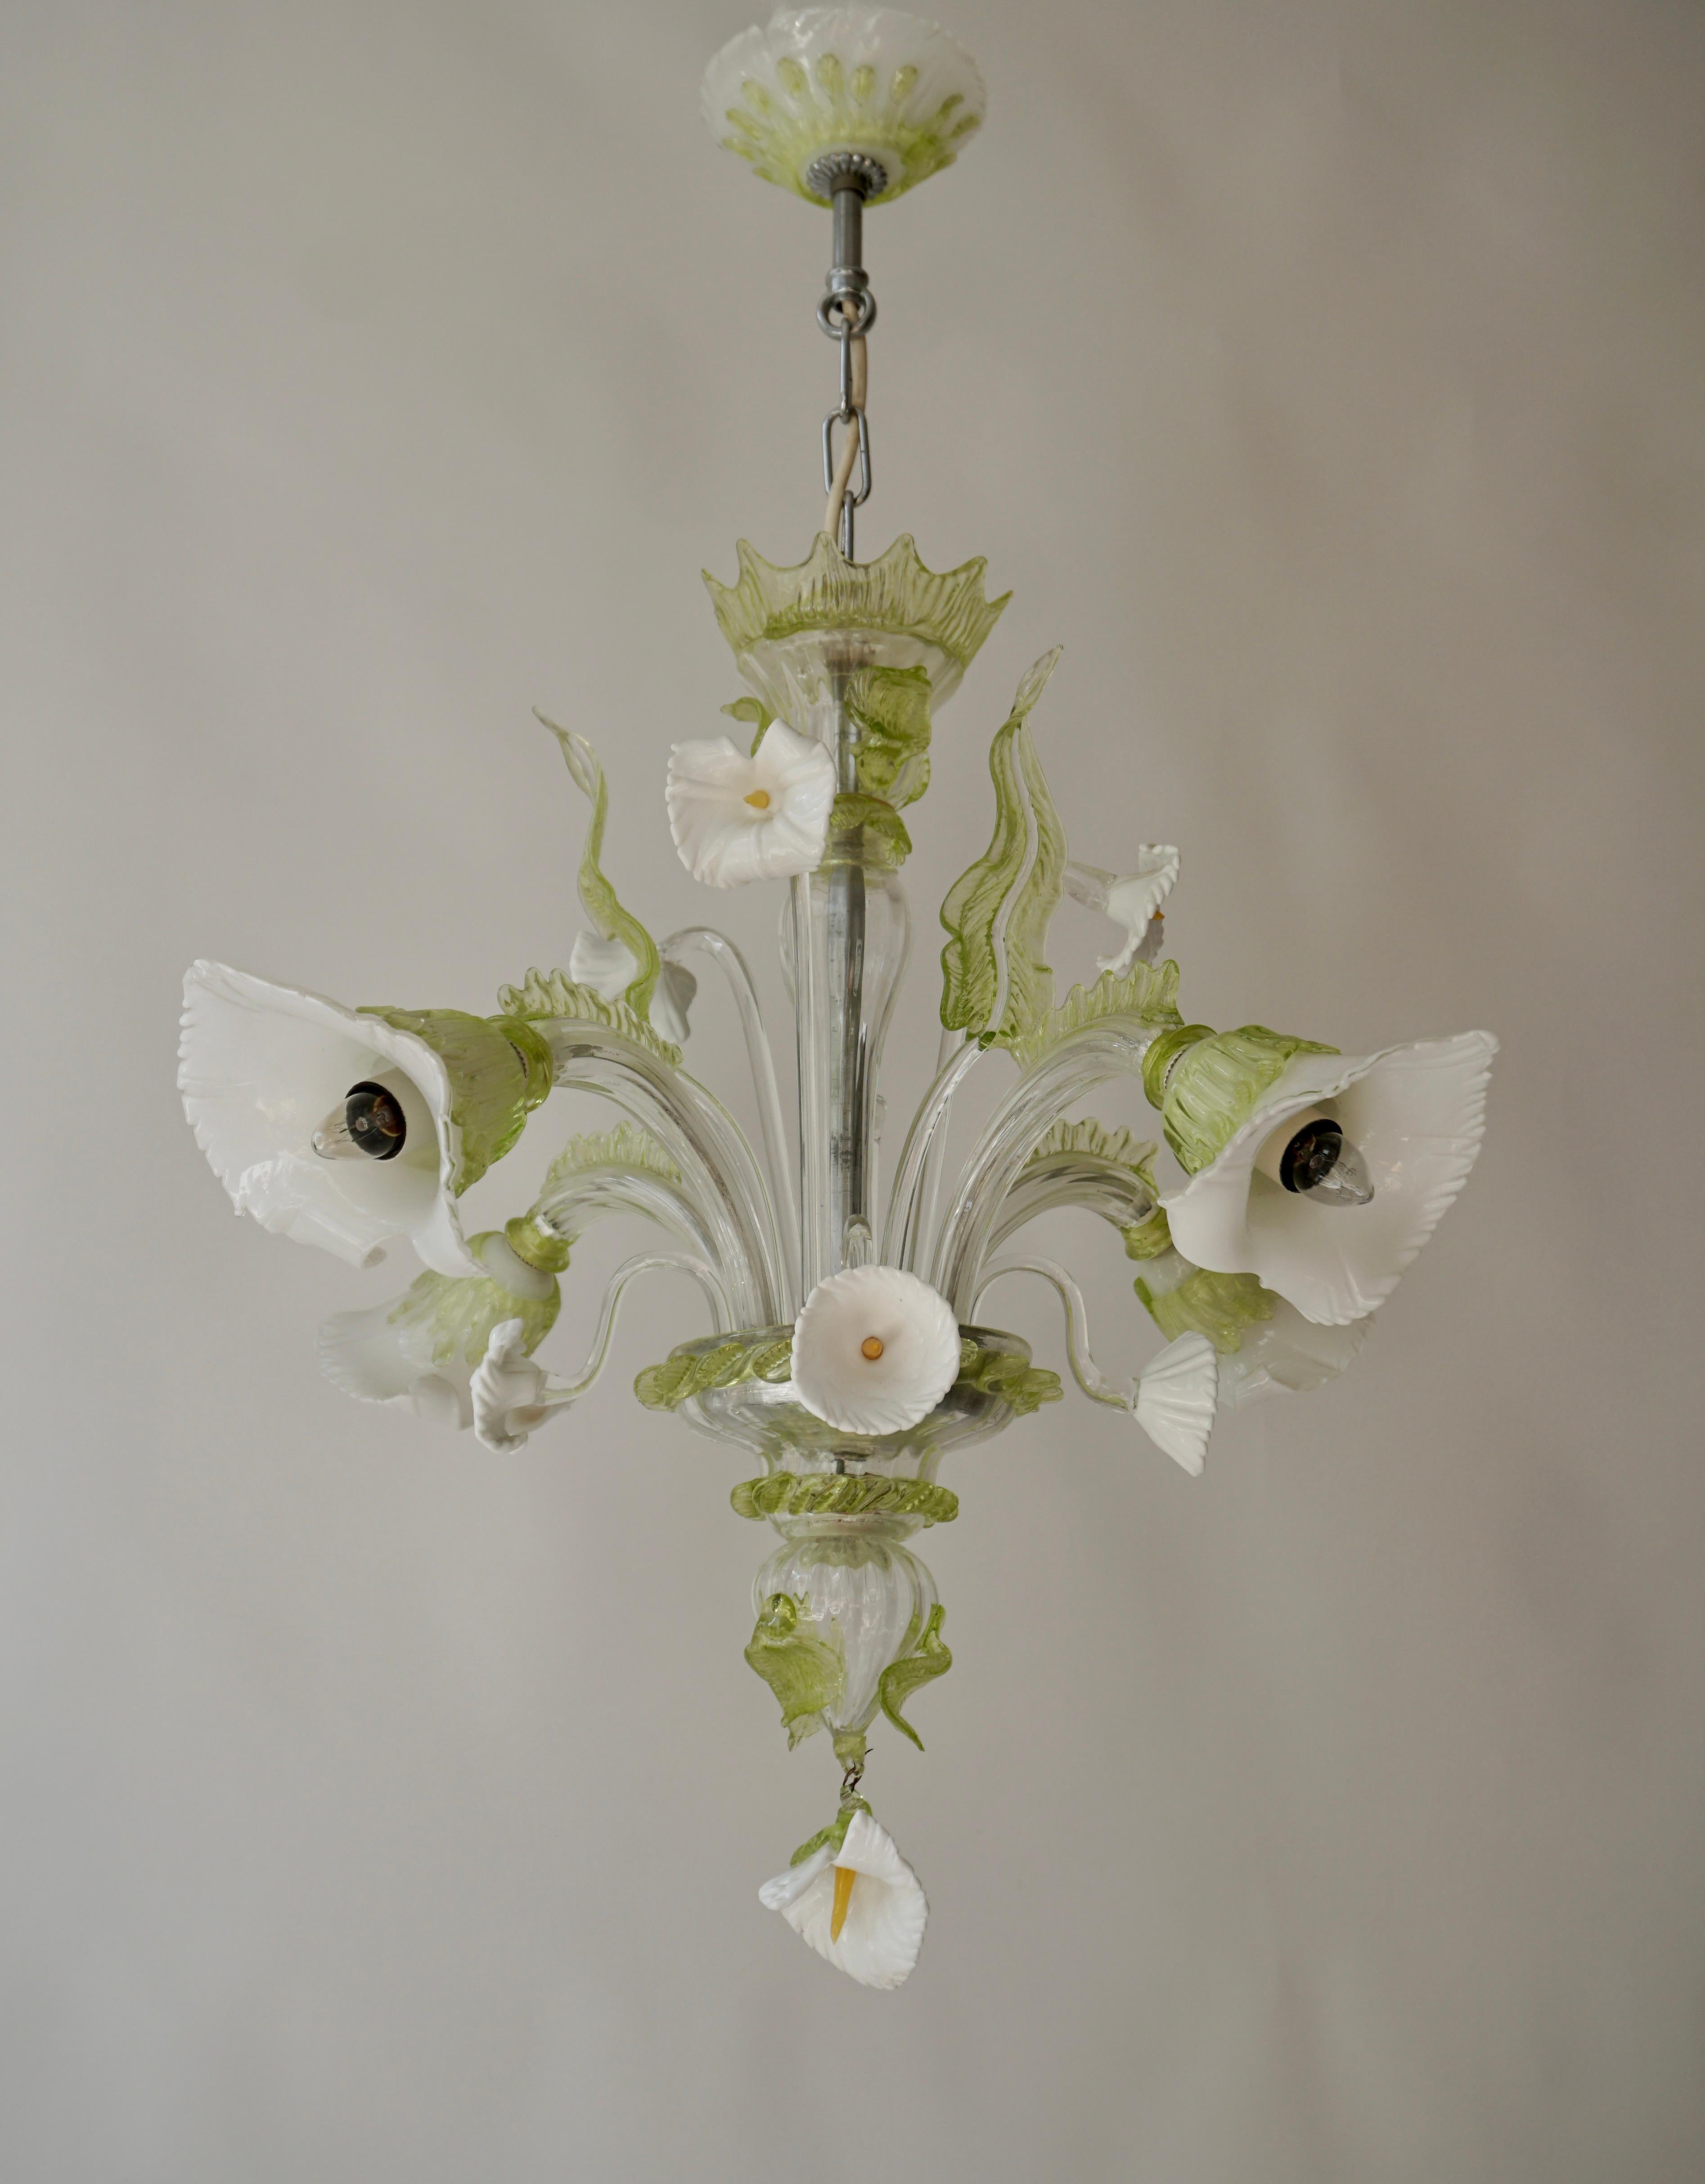 Elegant decorative floral Murano glass 4-arms chandelier, Venetian style.

Green/white color with flowers.

Diameter 60 cm.
Height fixture 55 cm.
Total height 75 cm.